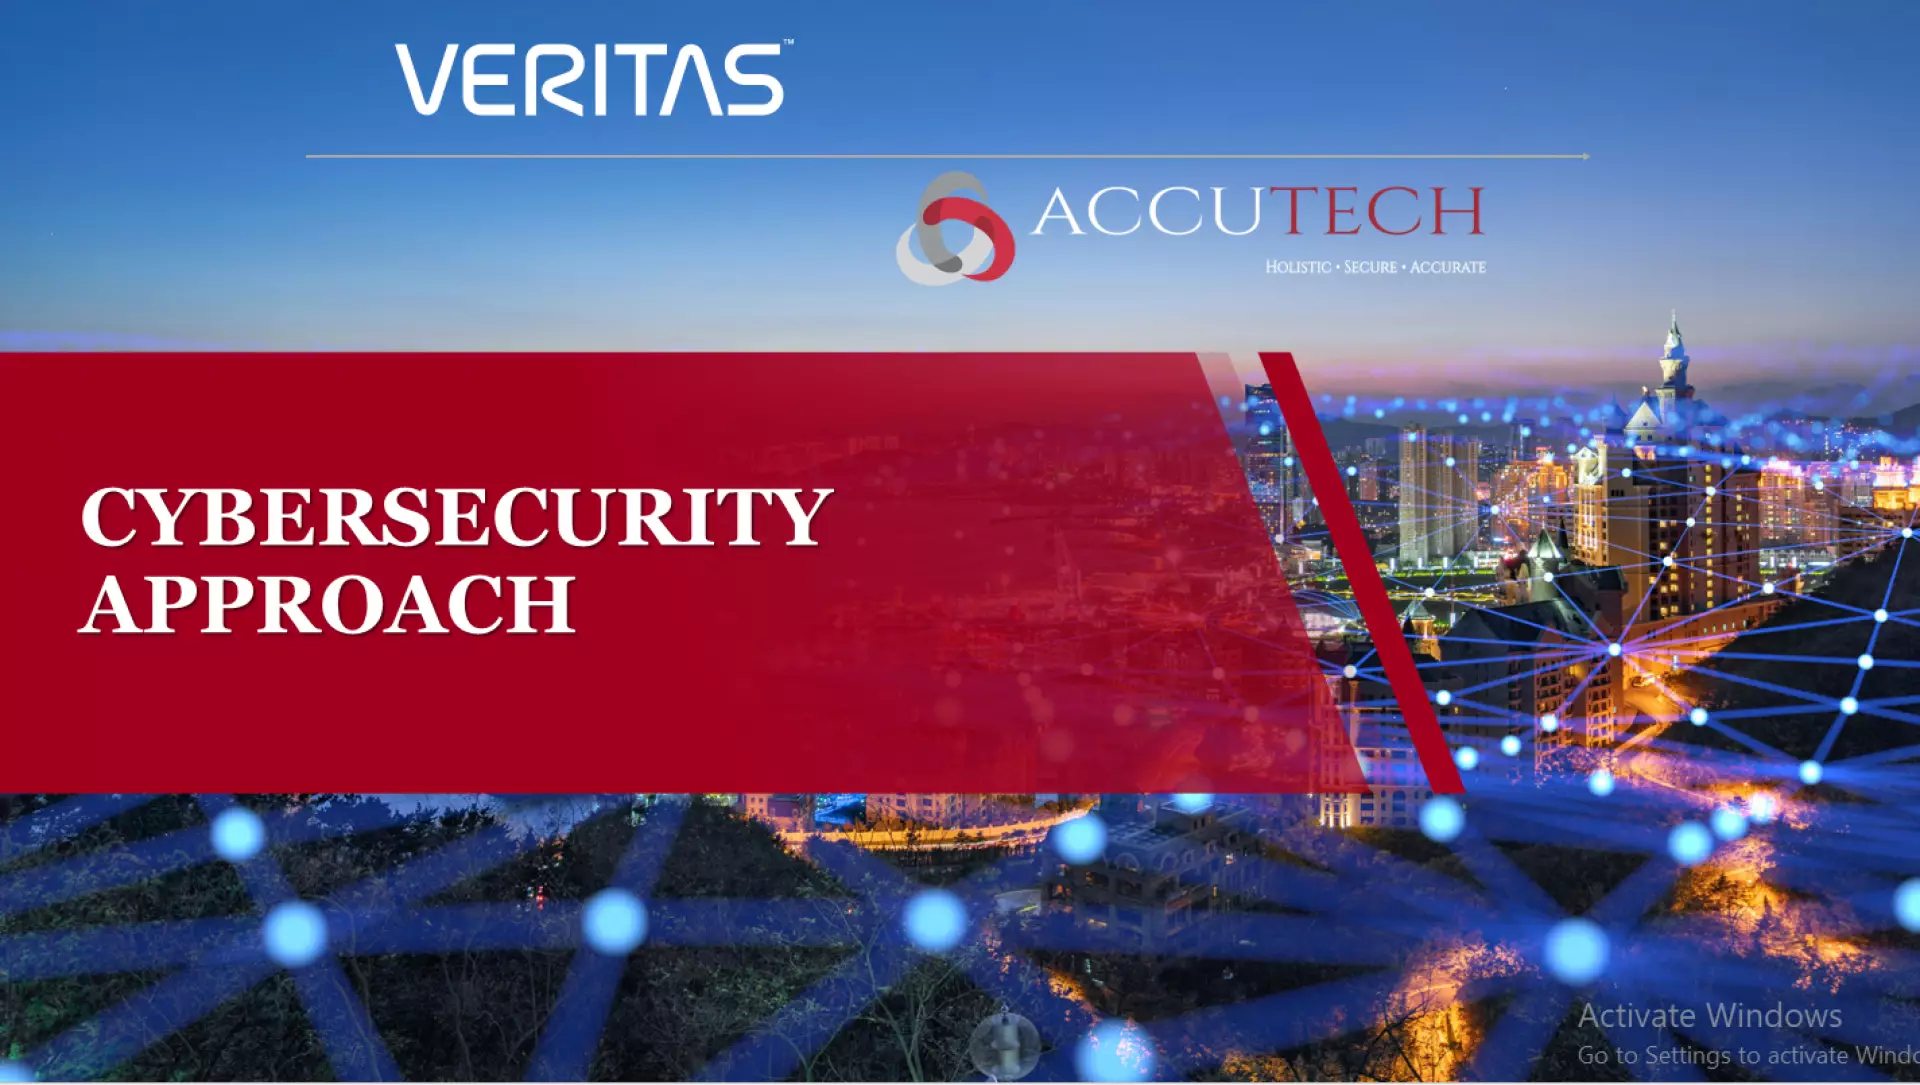 Solutions Against Ransomware – Accutech and Veritas Event